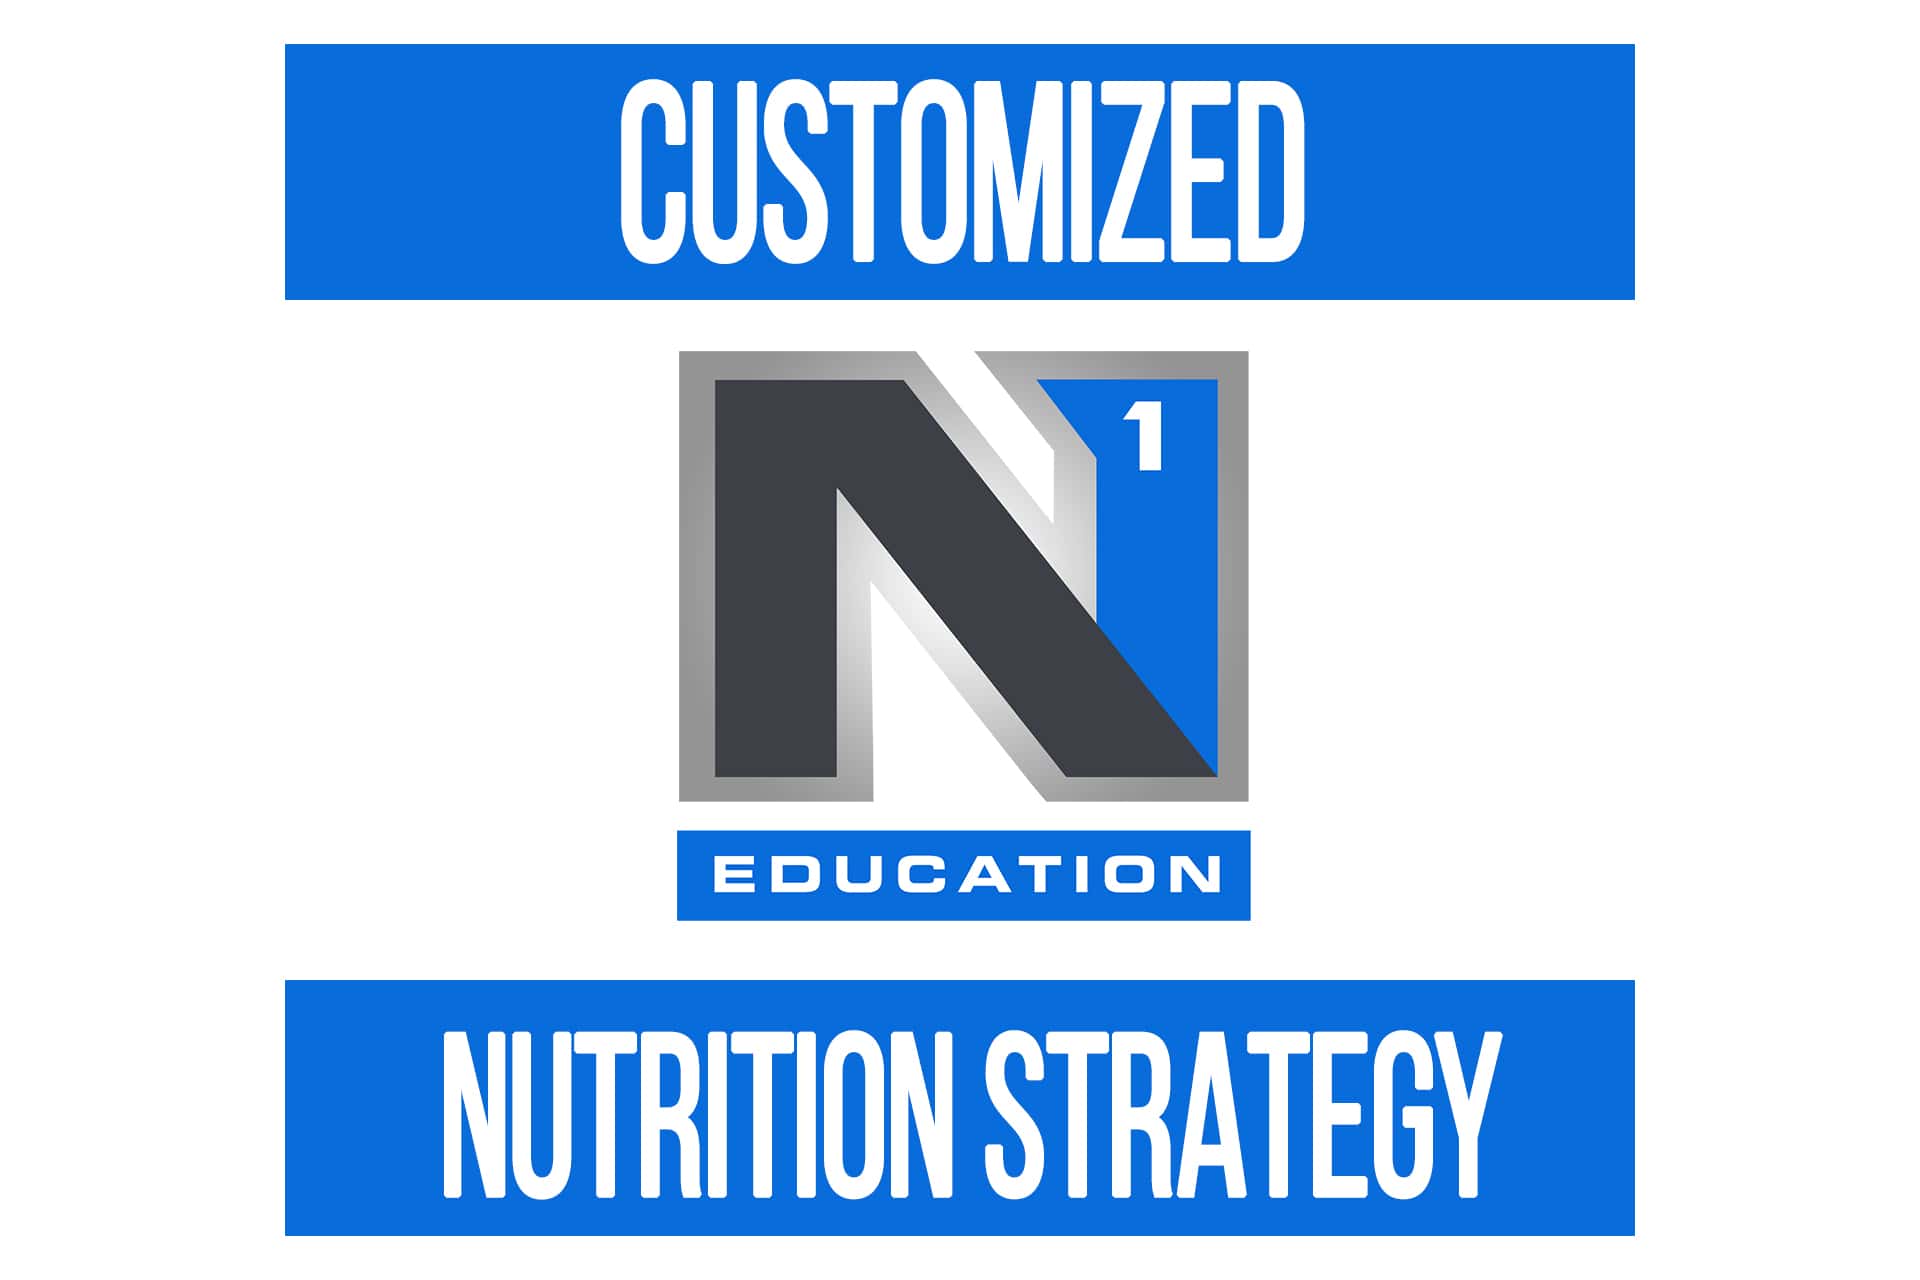 Customized Nutrition Strategy